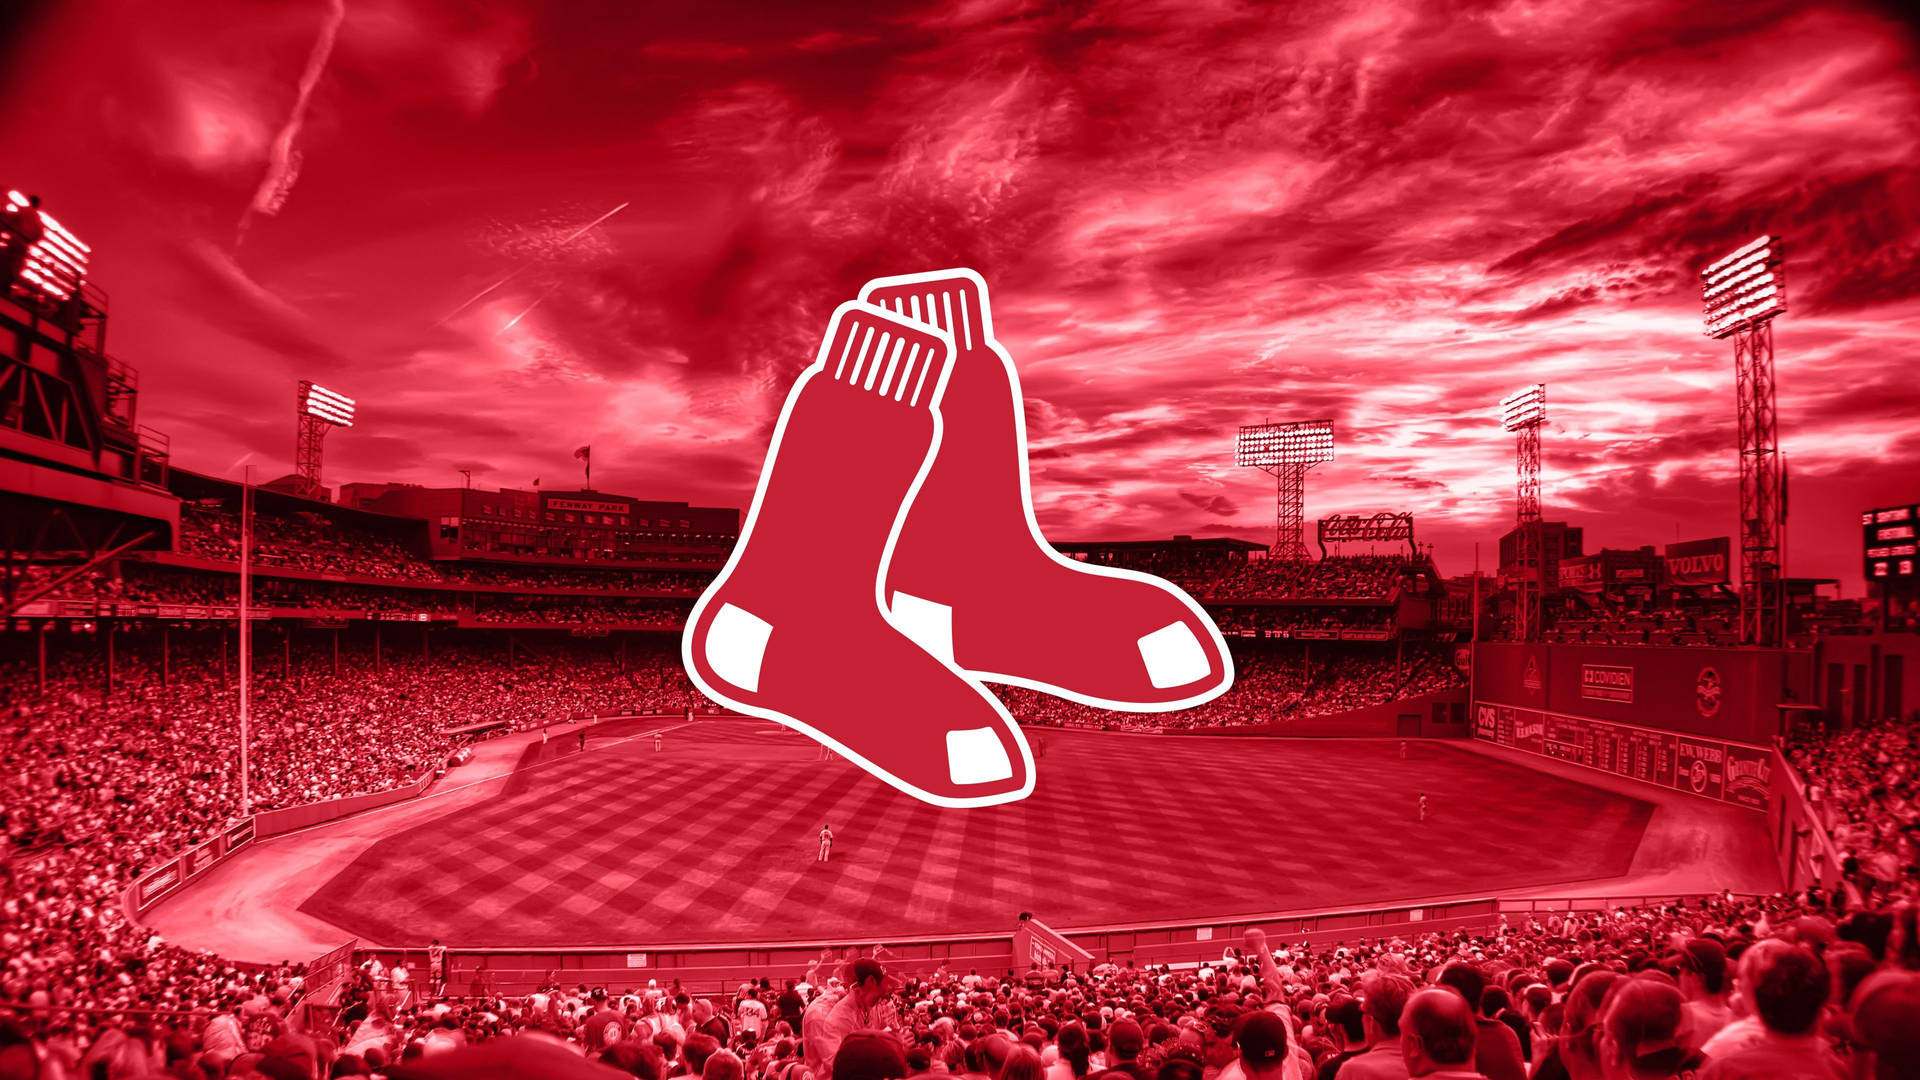 Red Sox Over A Red Field Wallpaper